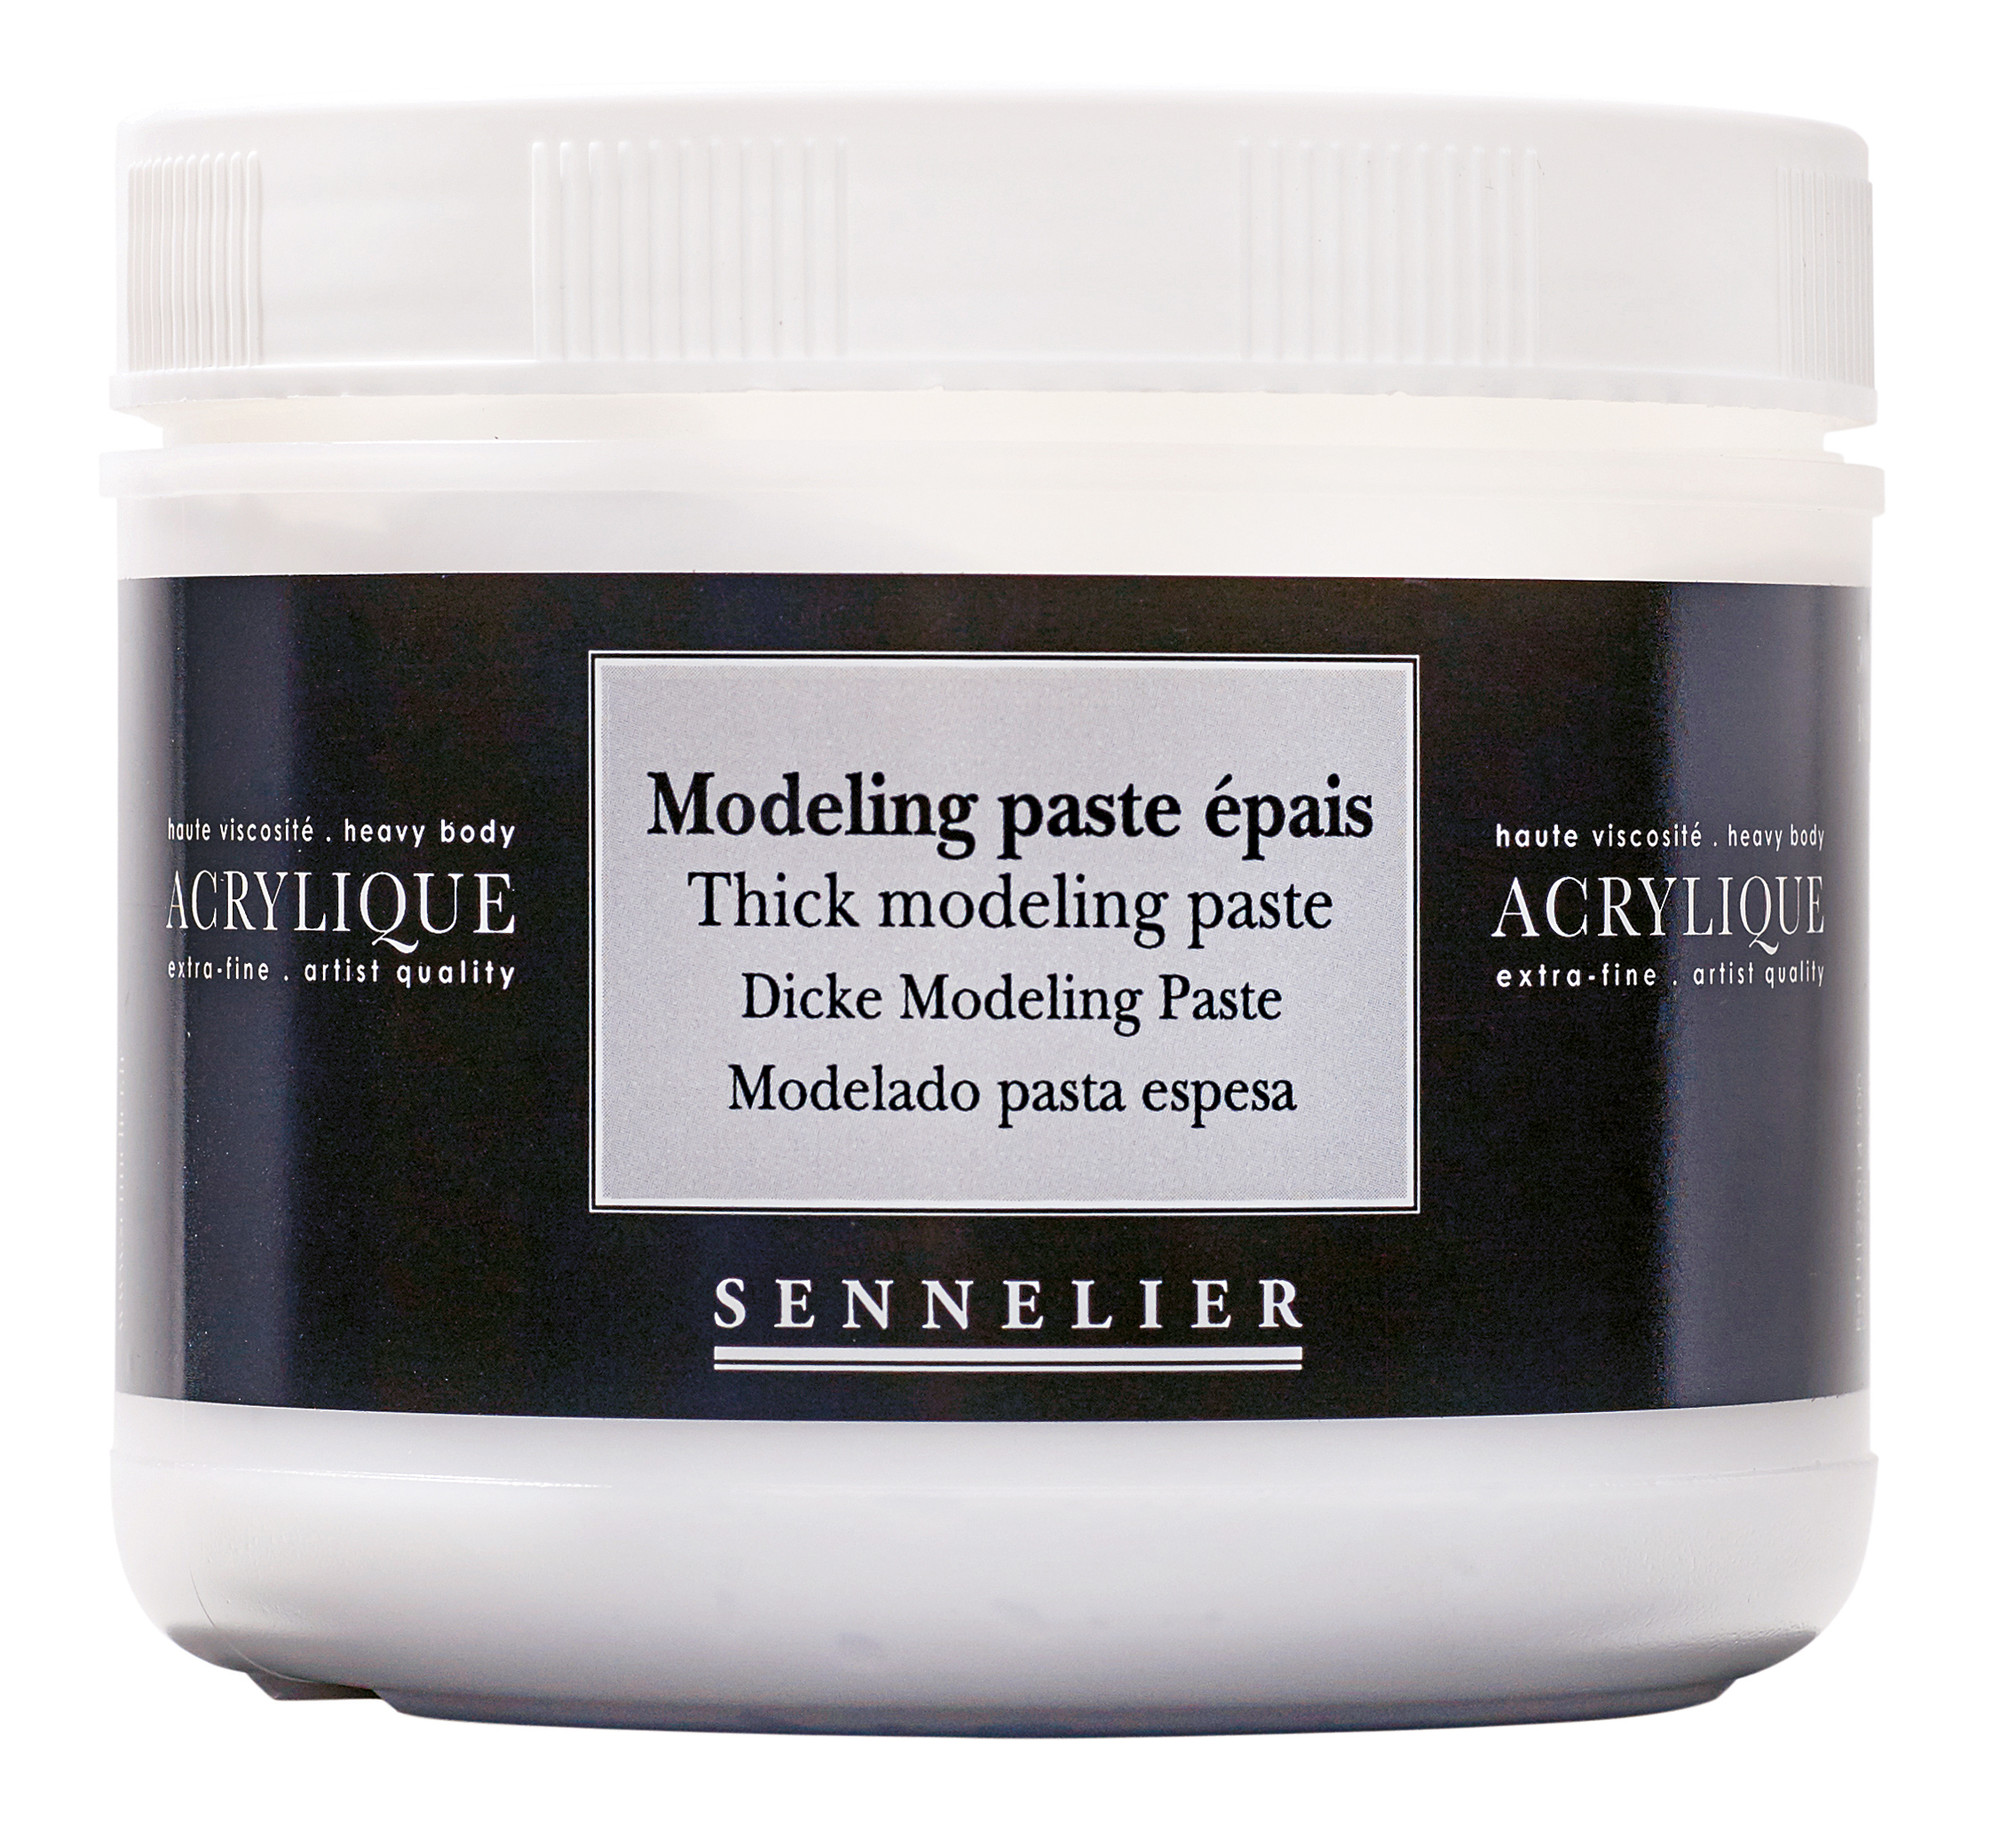 Thick modeling paste